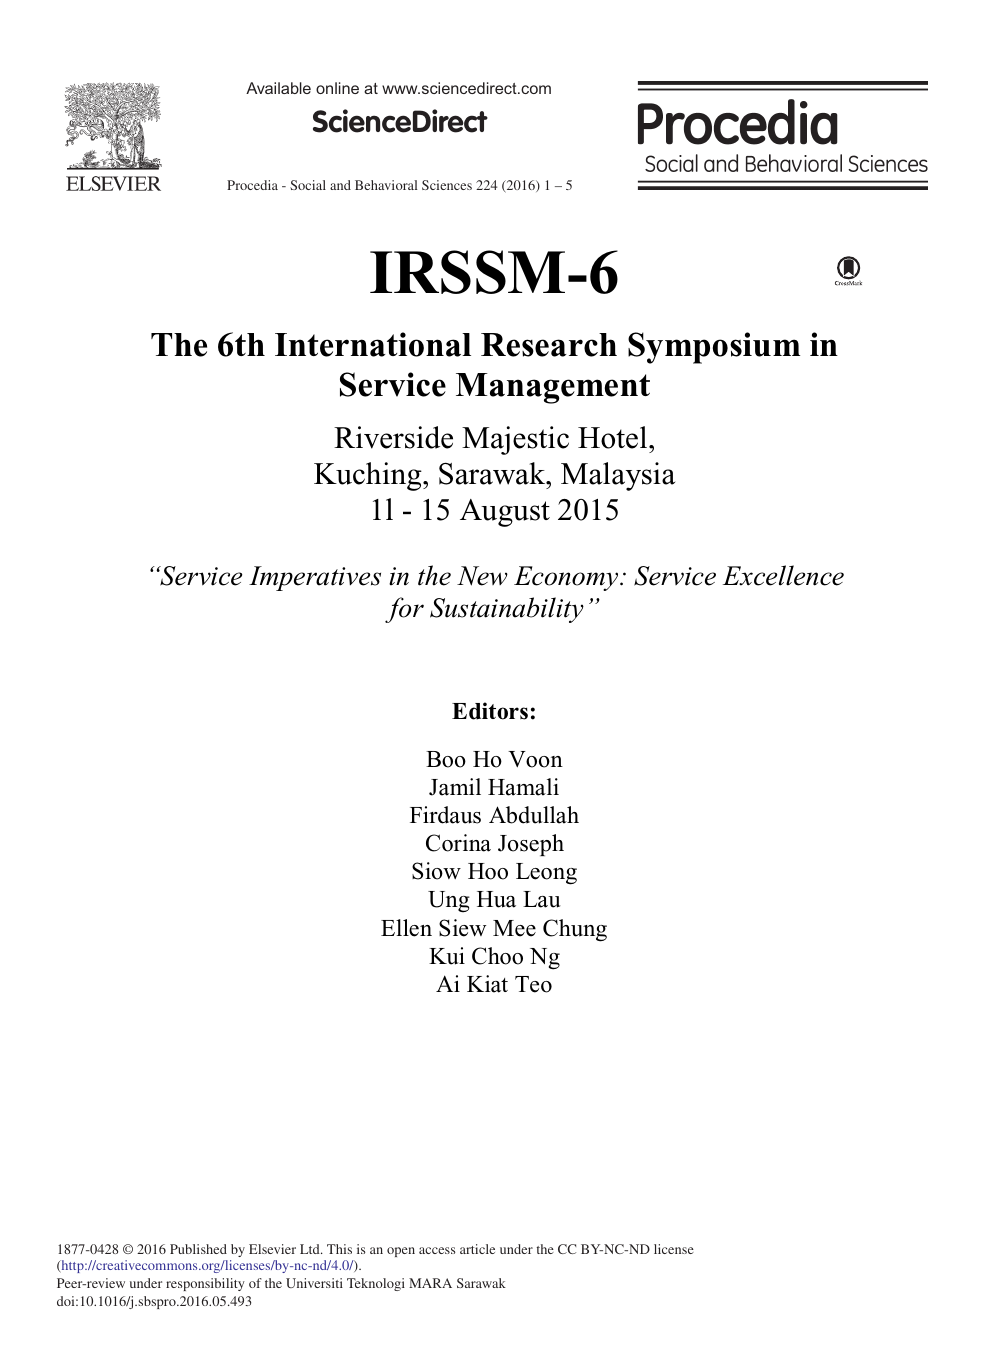 Irssm 6 The 6th International Research Symposium In Service Management Topic Of Research Paper In Economics And Business Download Scholarly Article Pdf And Read For Free On Cyberleninka Open Science Hub